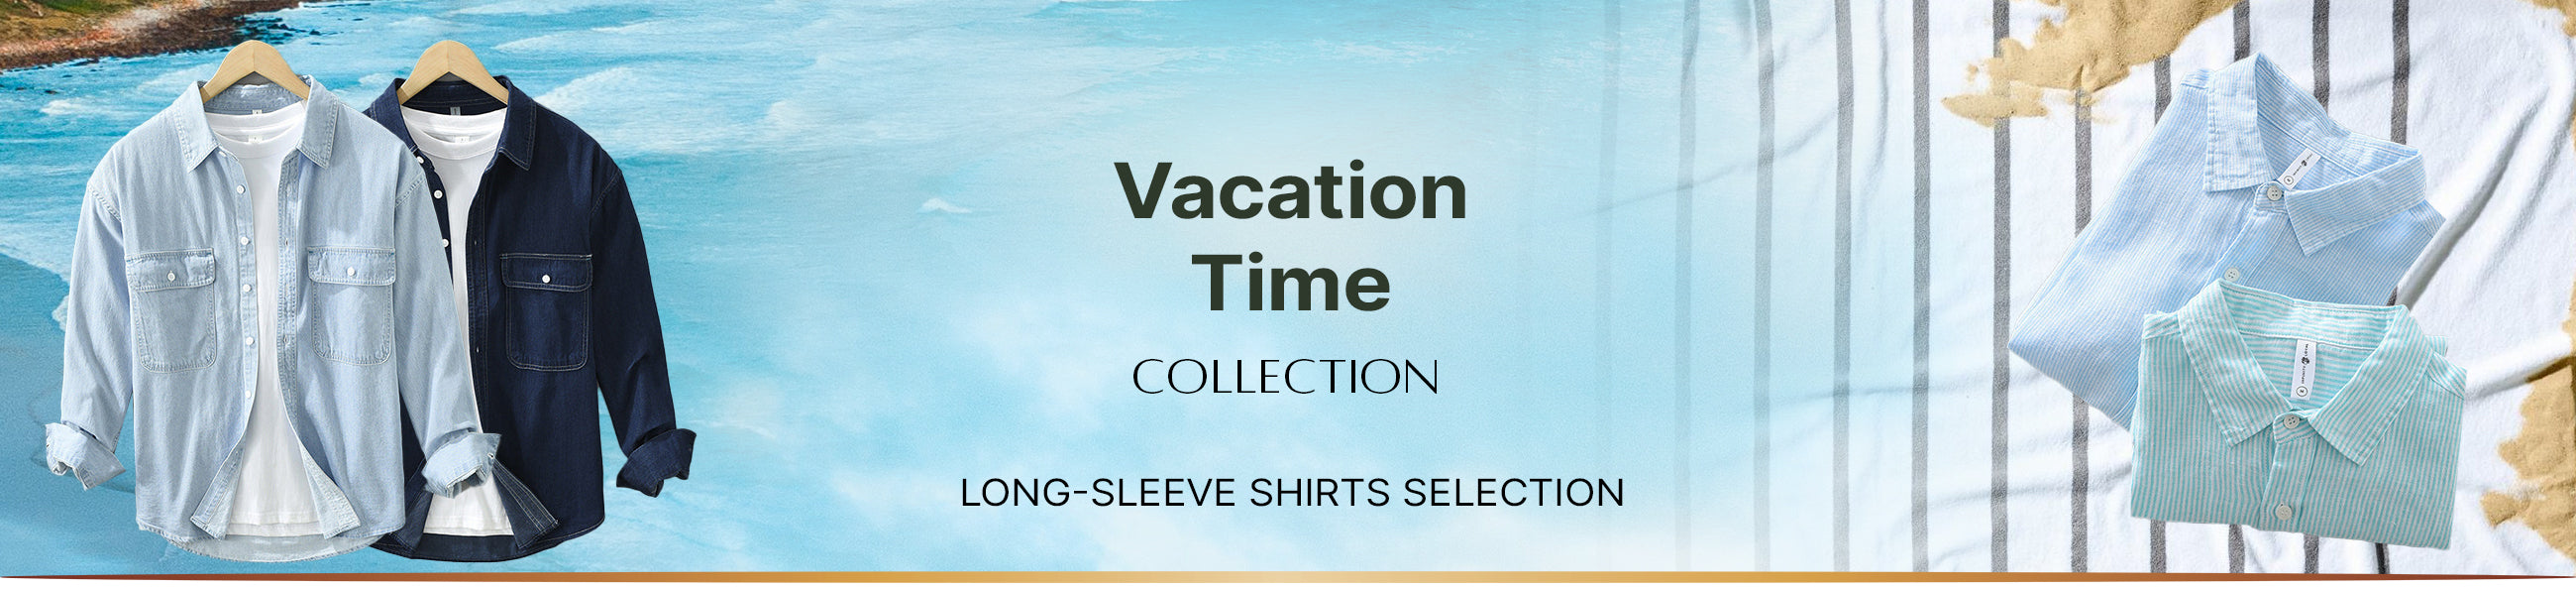 Vacation Time Collection DESKTOP_BANNER.jpg__PID:90a9ab72-f5a2-418a-8237-09469ab0617e